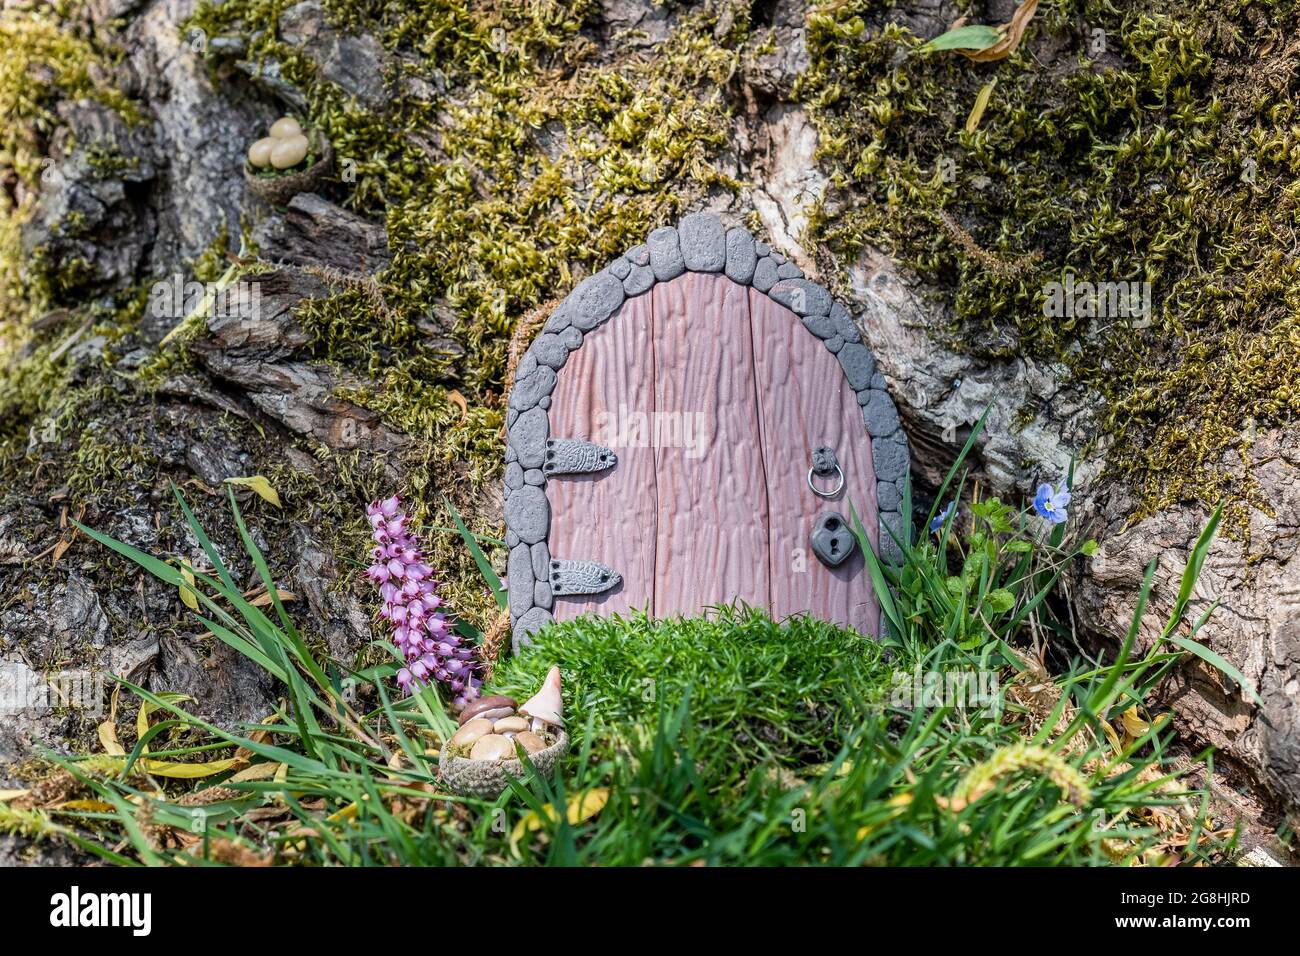 small doors and mushrooms in a basket made of polymer clay on a tree like a fairy house close up. Stock Photo